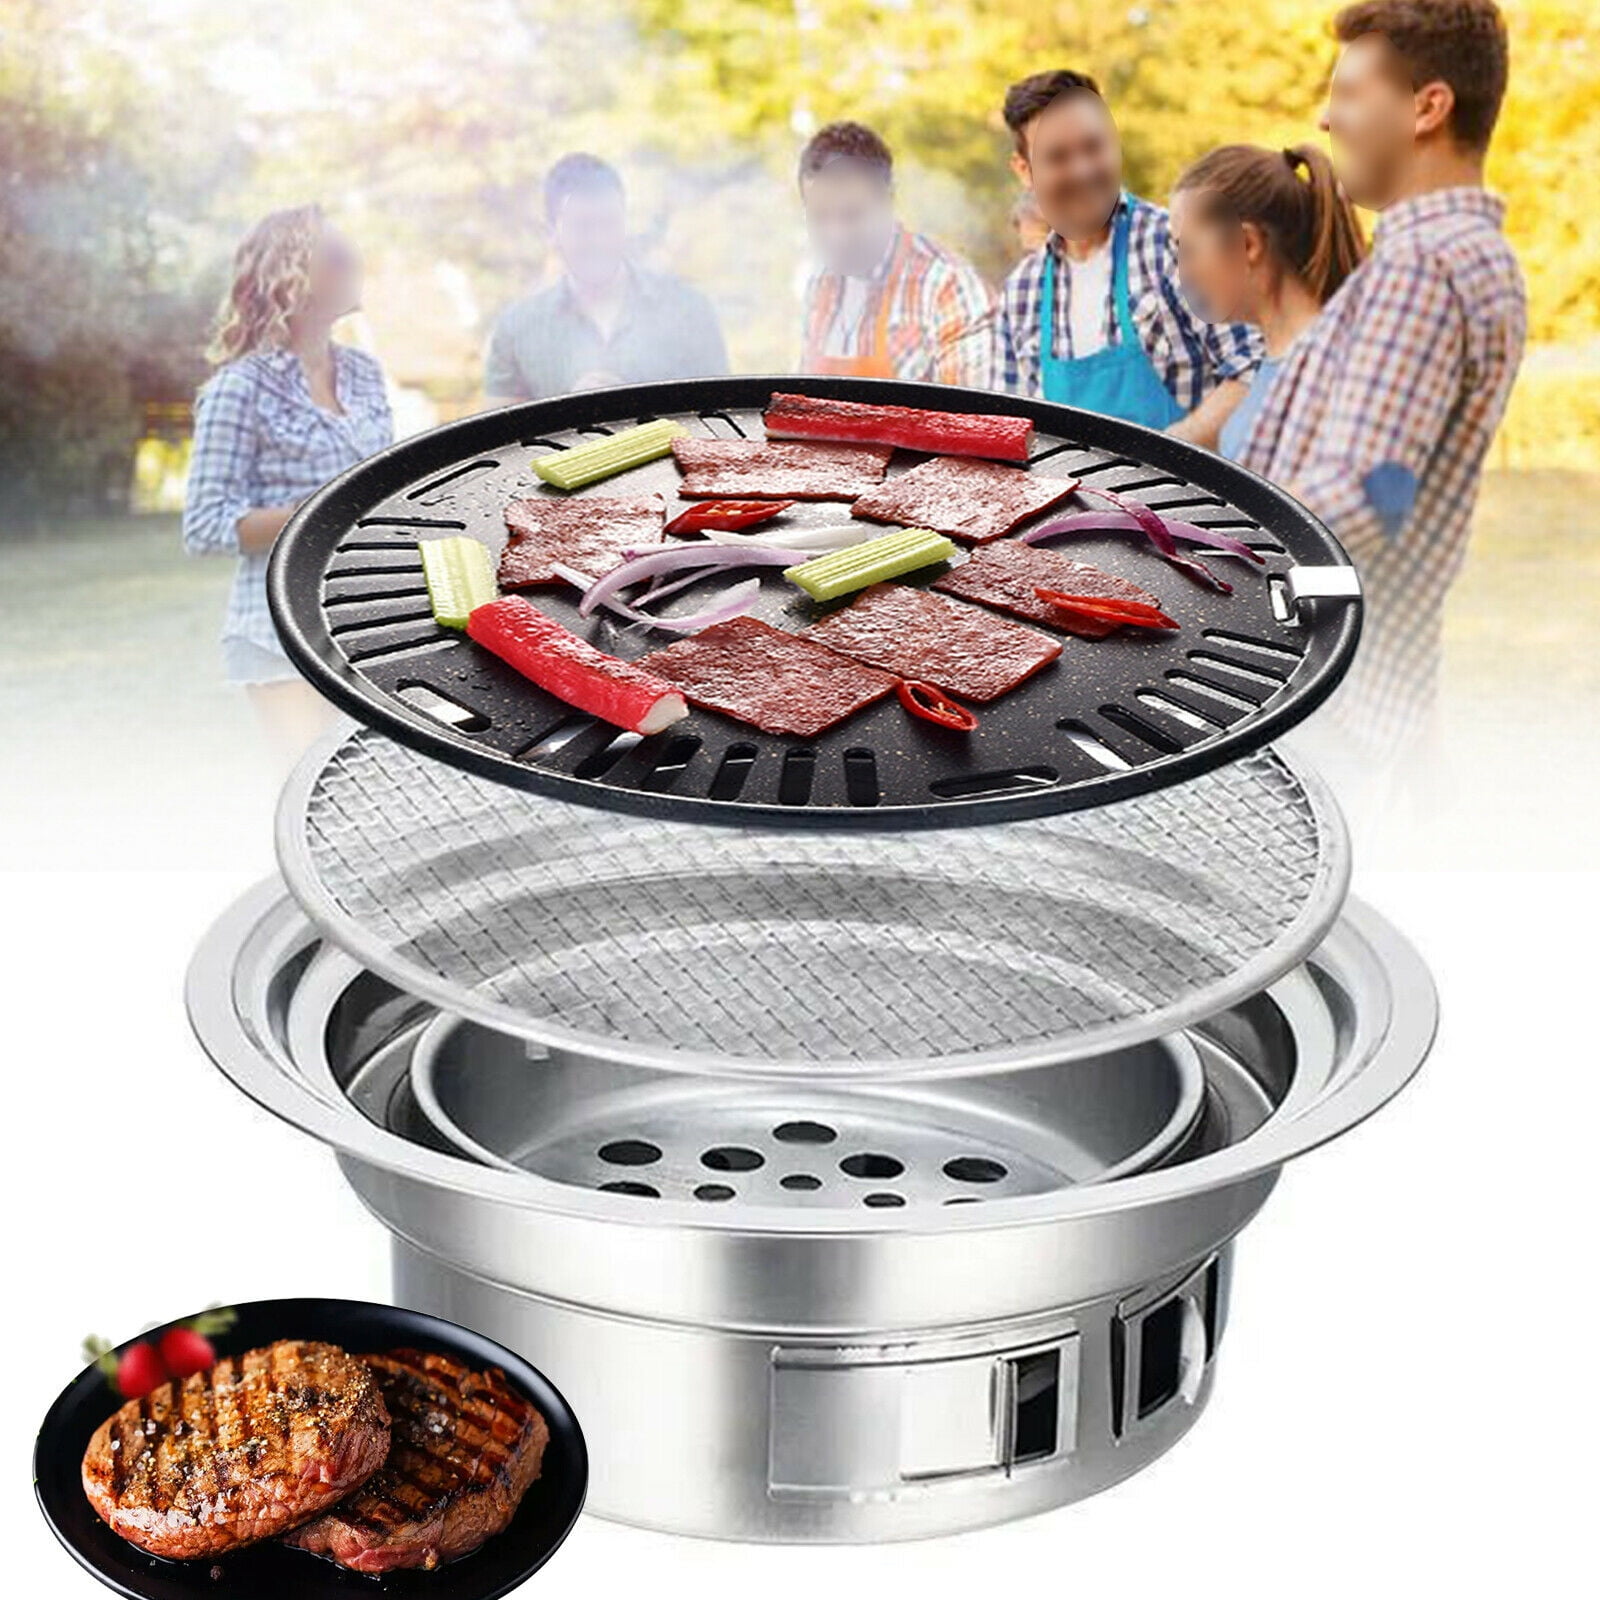 Japanese Korean Style Ceramic BBQ Grill Hibachi Charcoal Barbecue Stove Cooker 